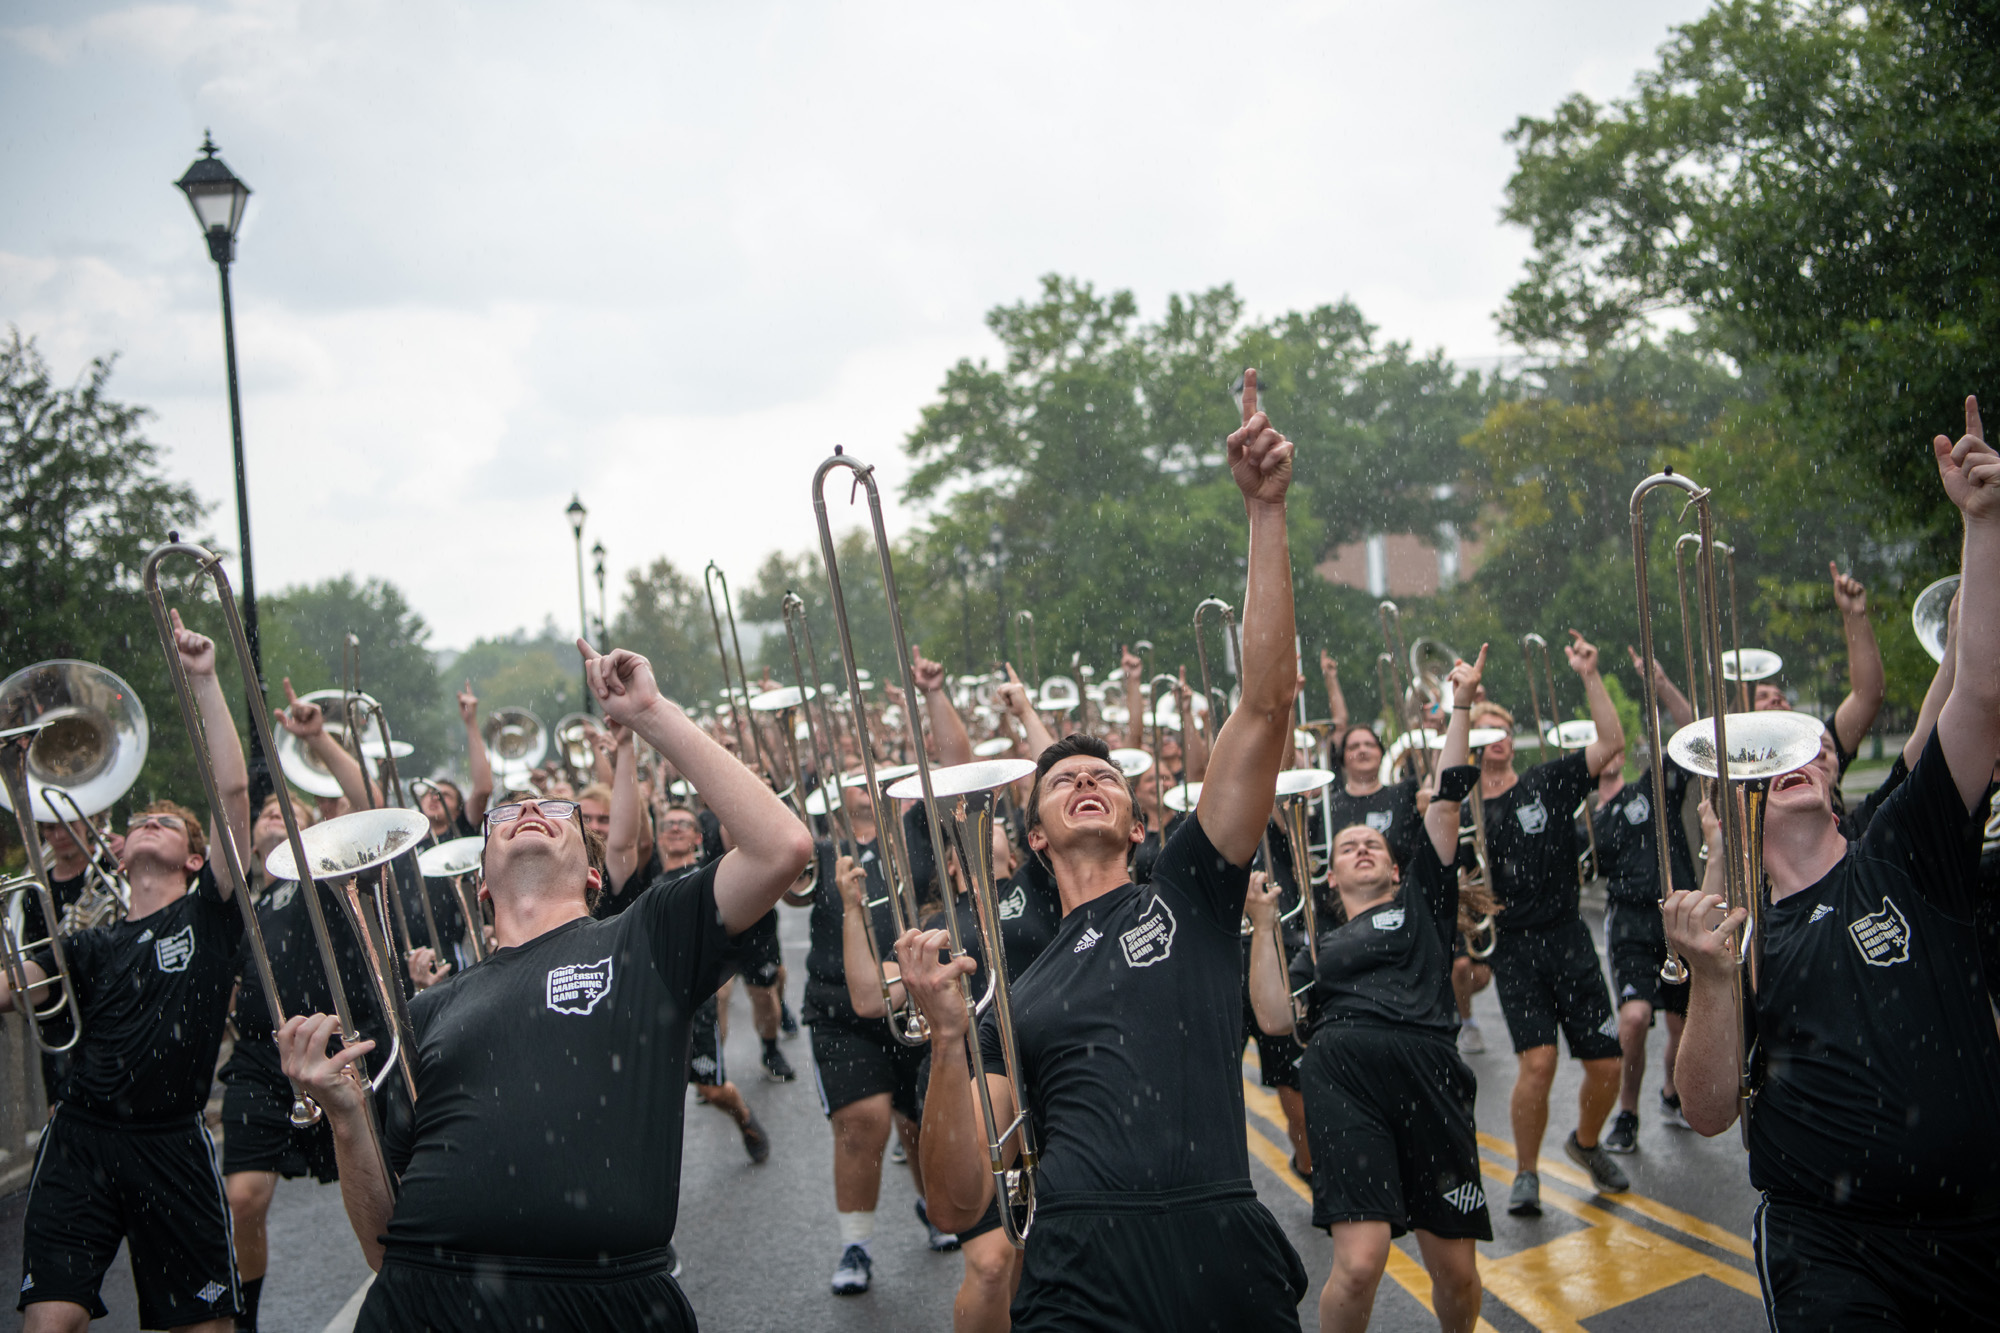 The OHIO Marching 110 enthusiastically play and march down a brick street in the rain